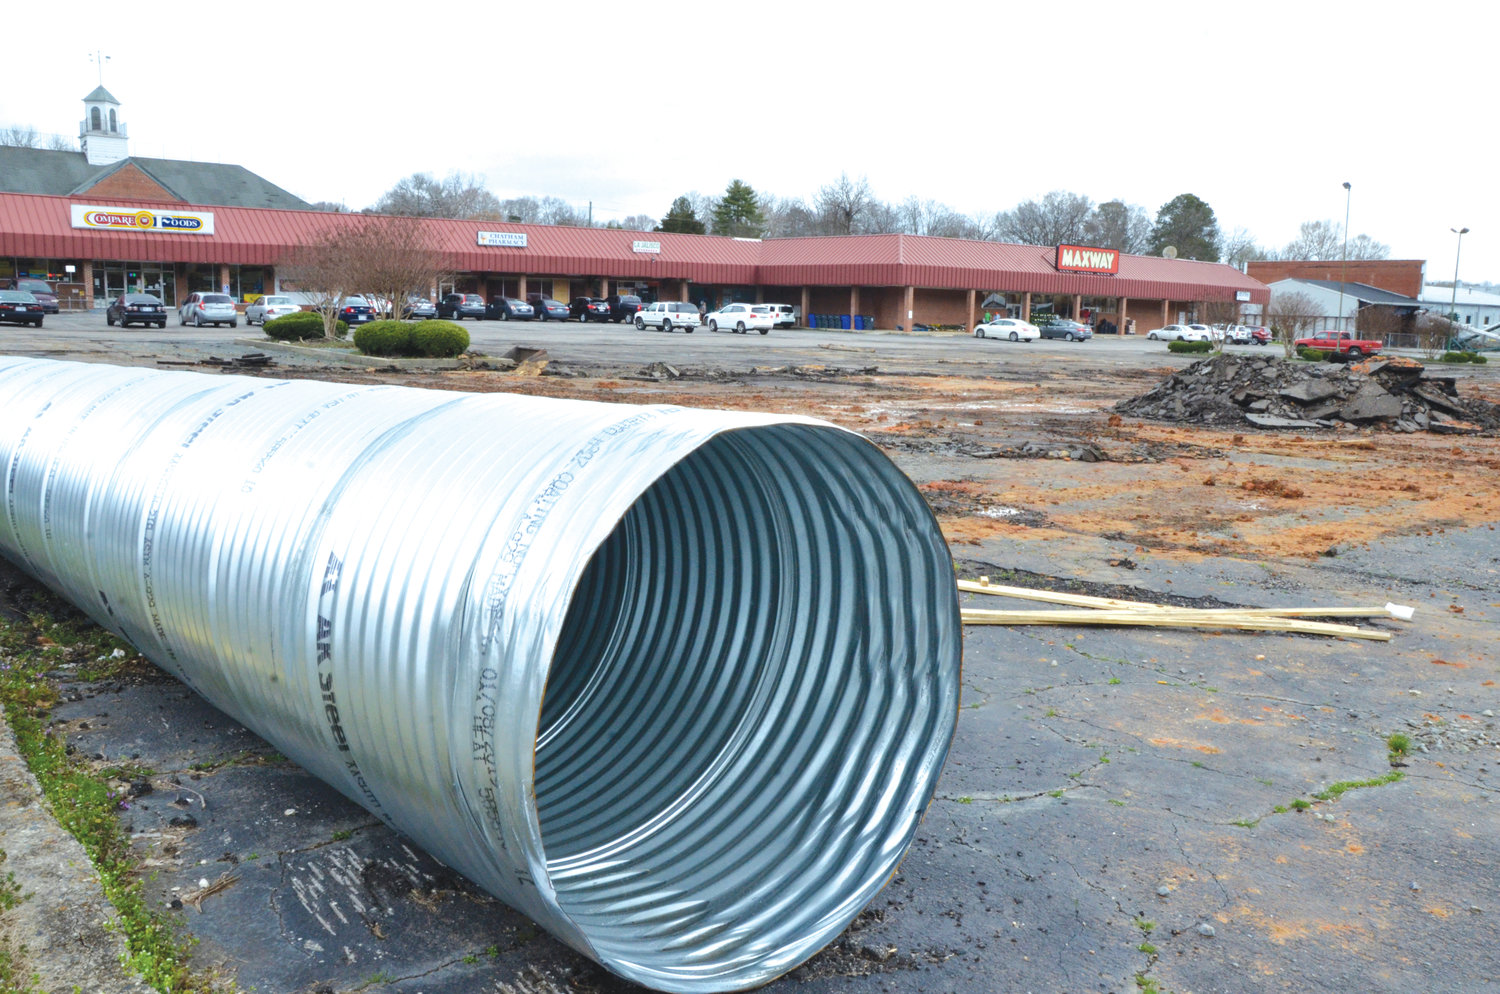 A steel tube will be installed, replacing a worn-out culvert, to better manage stormwater flow at the Maxway parking lot. Stormwater in the Loves Creek Watershed has been flooding the lot — and nearby businesses — for decades.